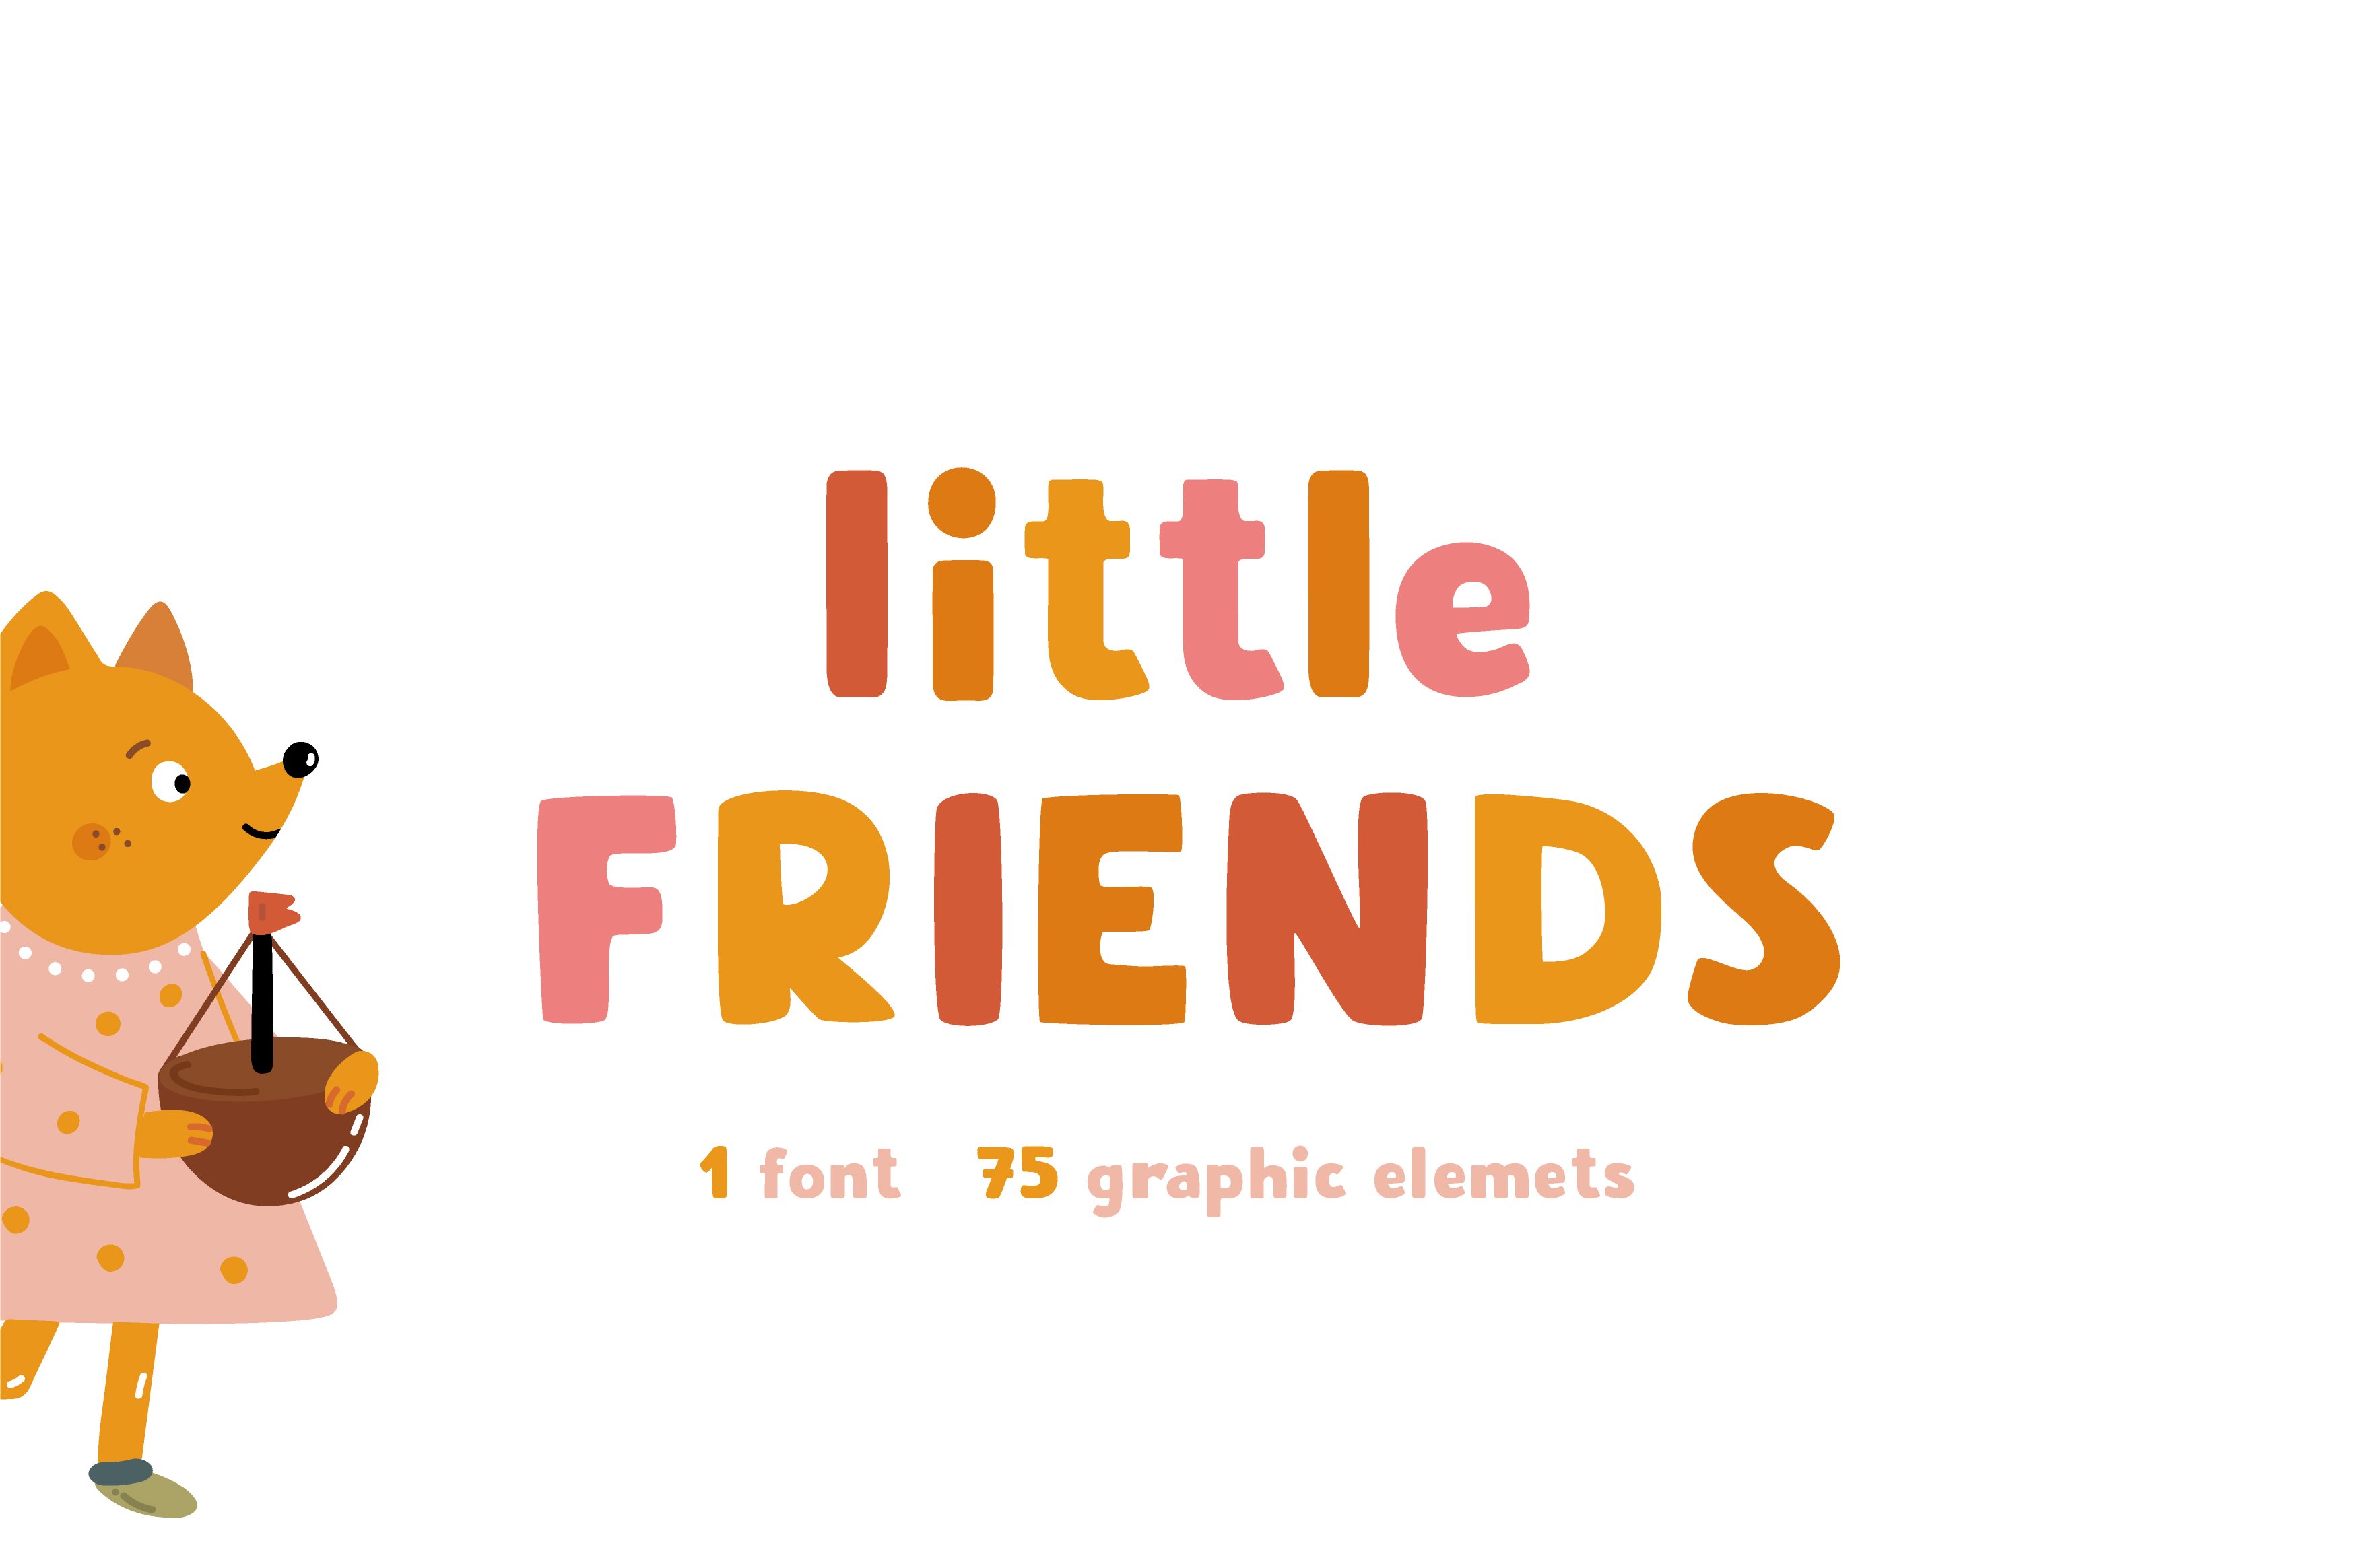 Little friends | Hand drawn font cover image.